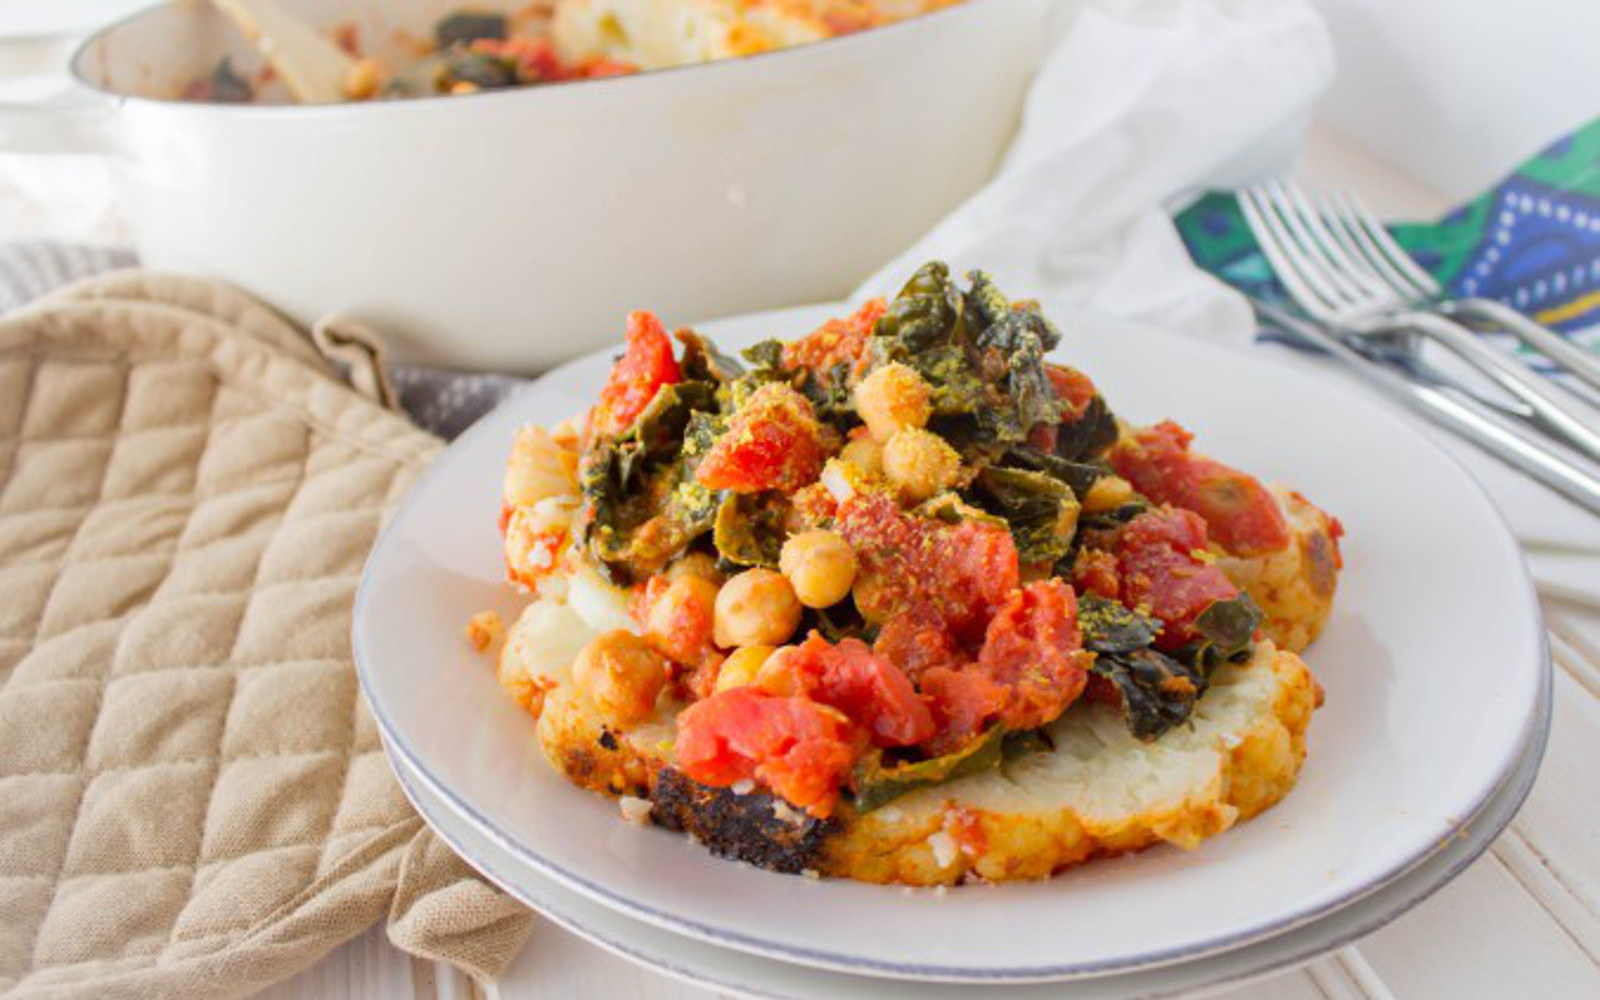 Braised Cauliflower With Chickpeas, Tomato, and Kale